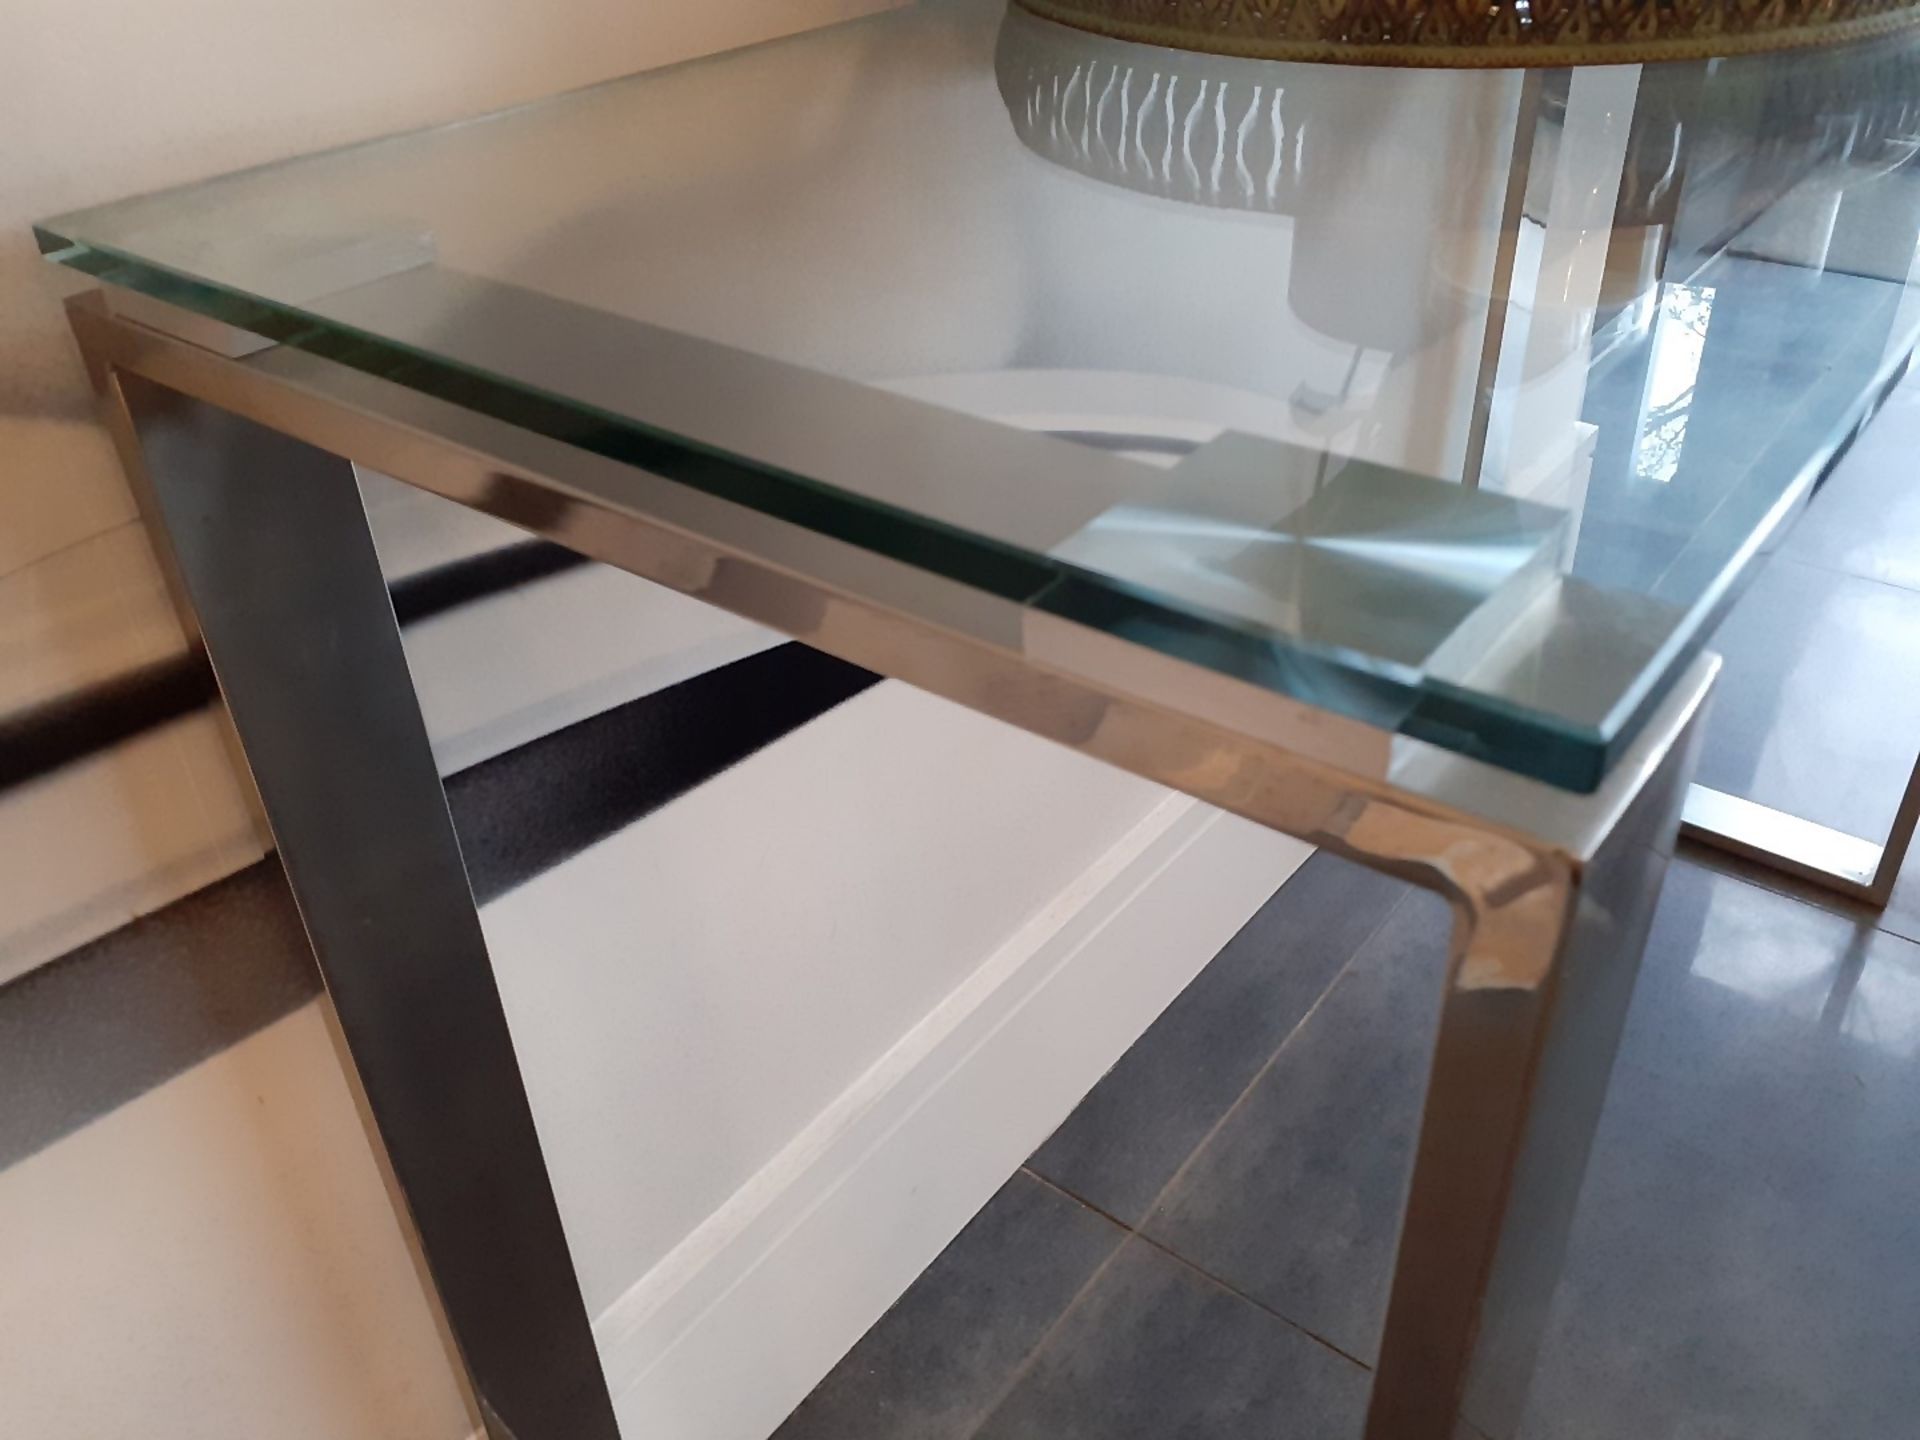 1 x Glass Topped Console Table With A Sturdy Metal Frame - Dimensions: 110 x 40 x H74cm - Image 3 of 3